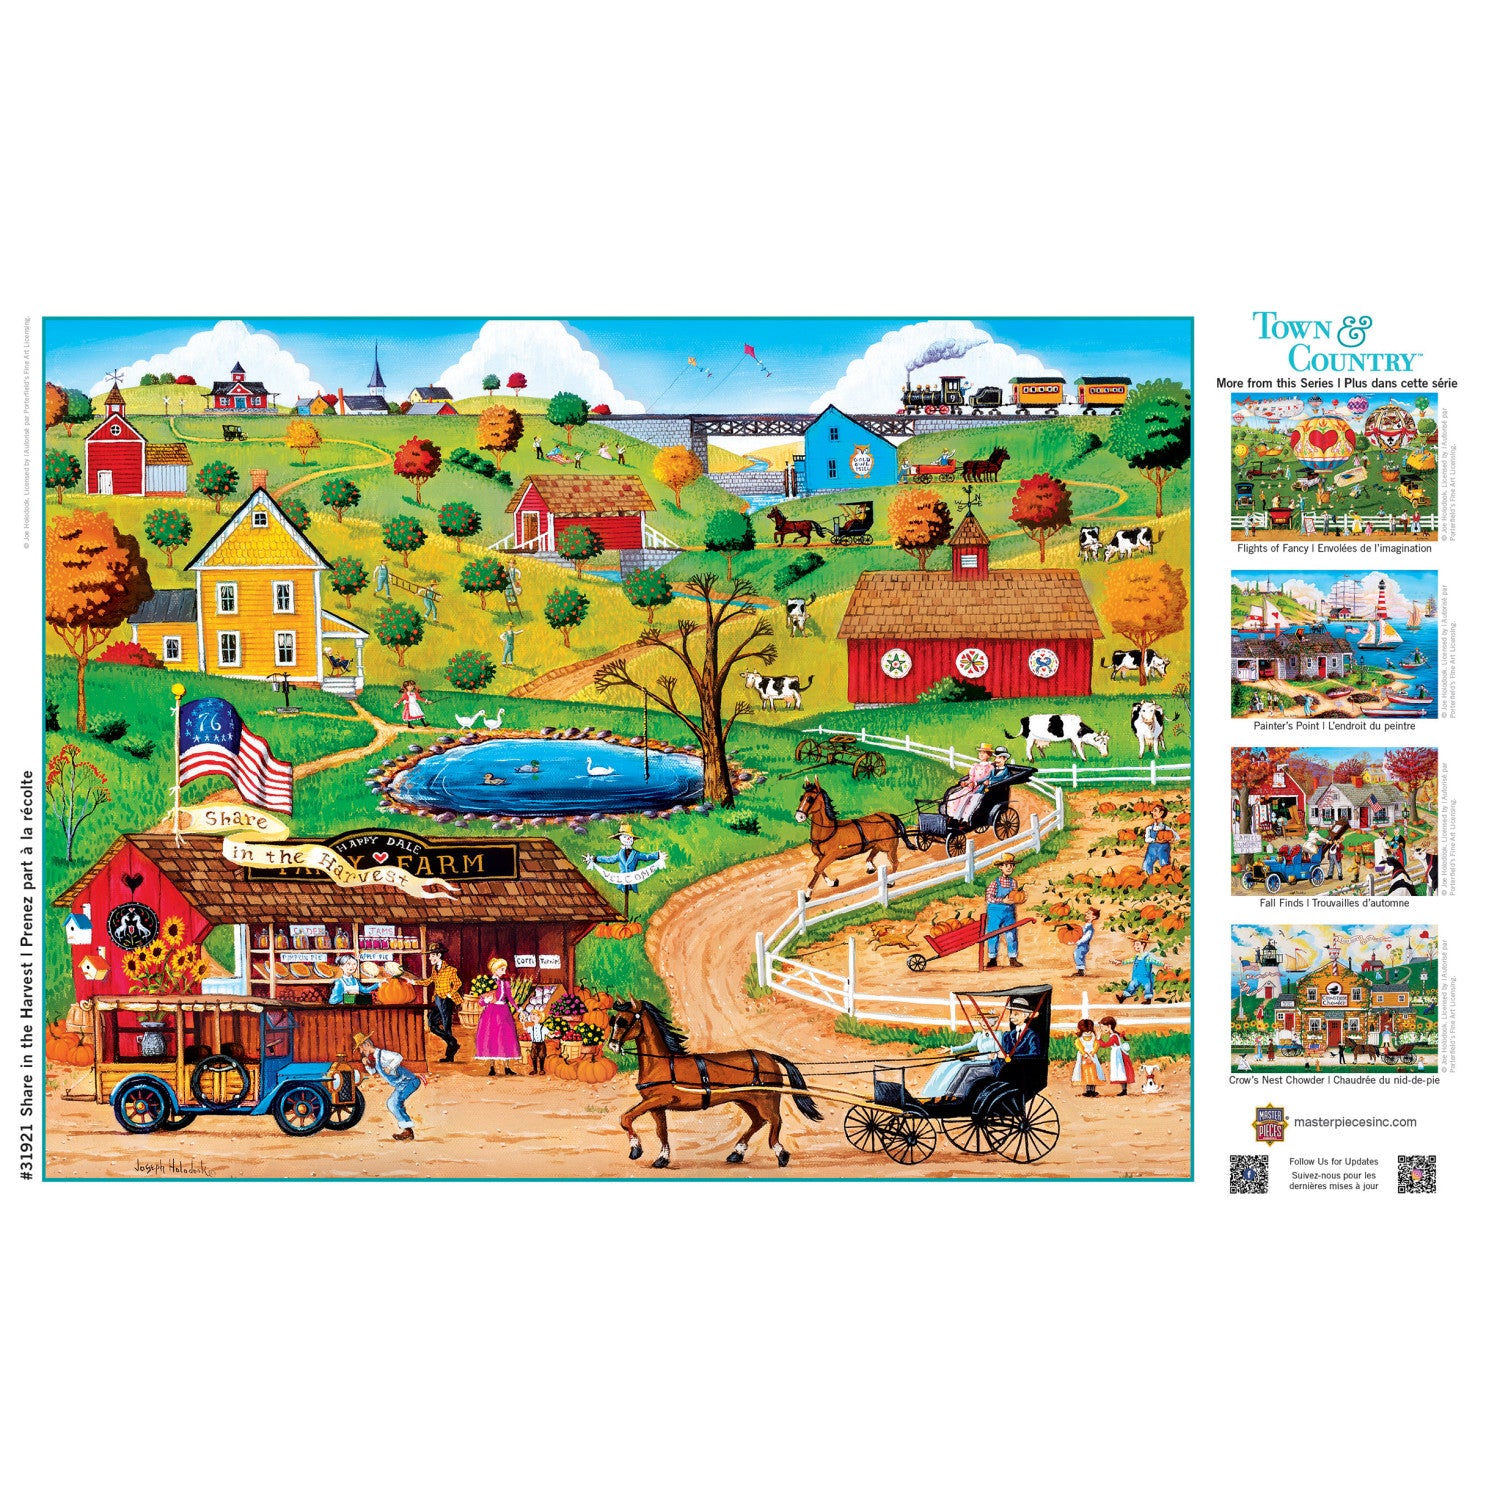 Town & Country - Share in the Harvest 300 Piece EZ Grip Puzzle